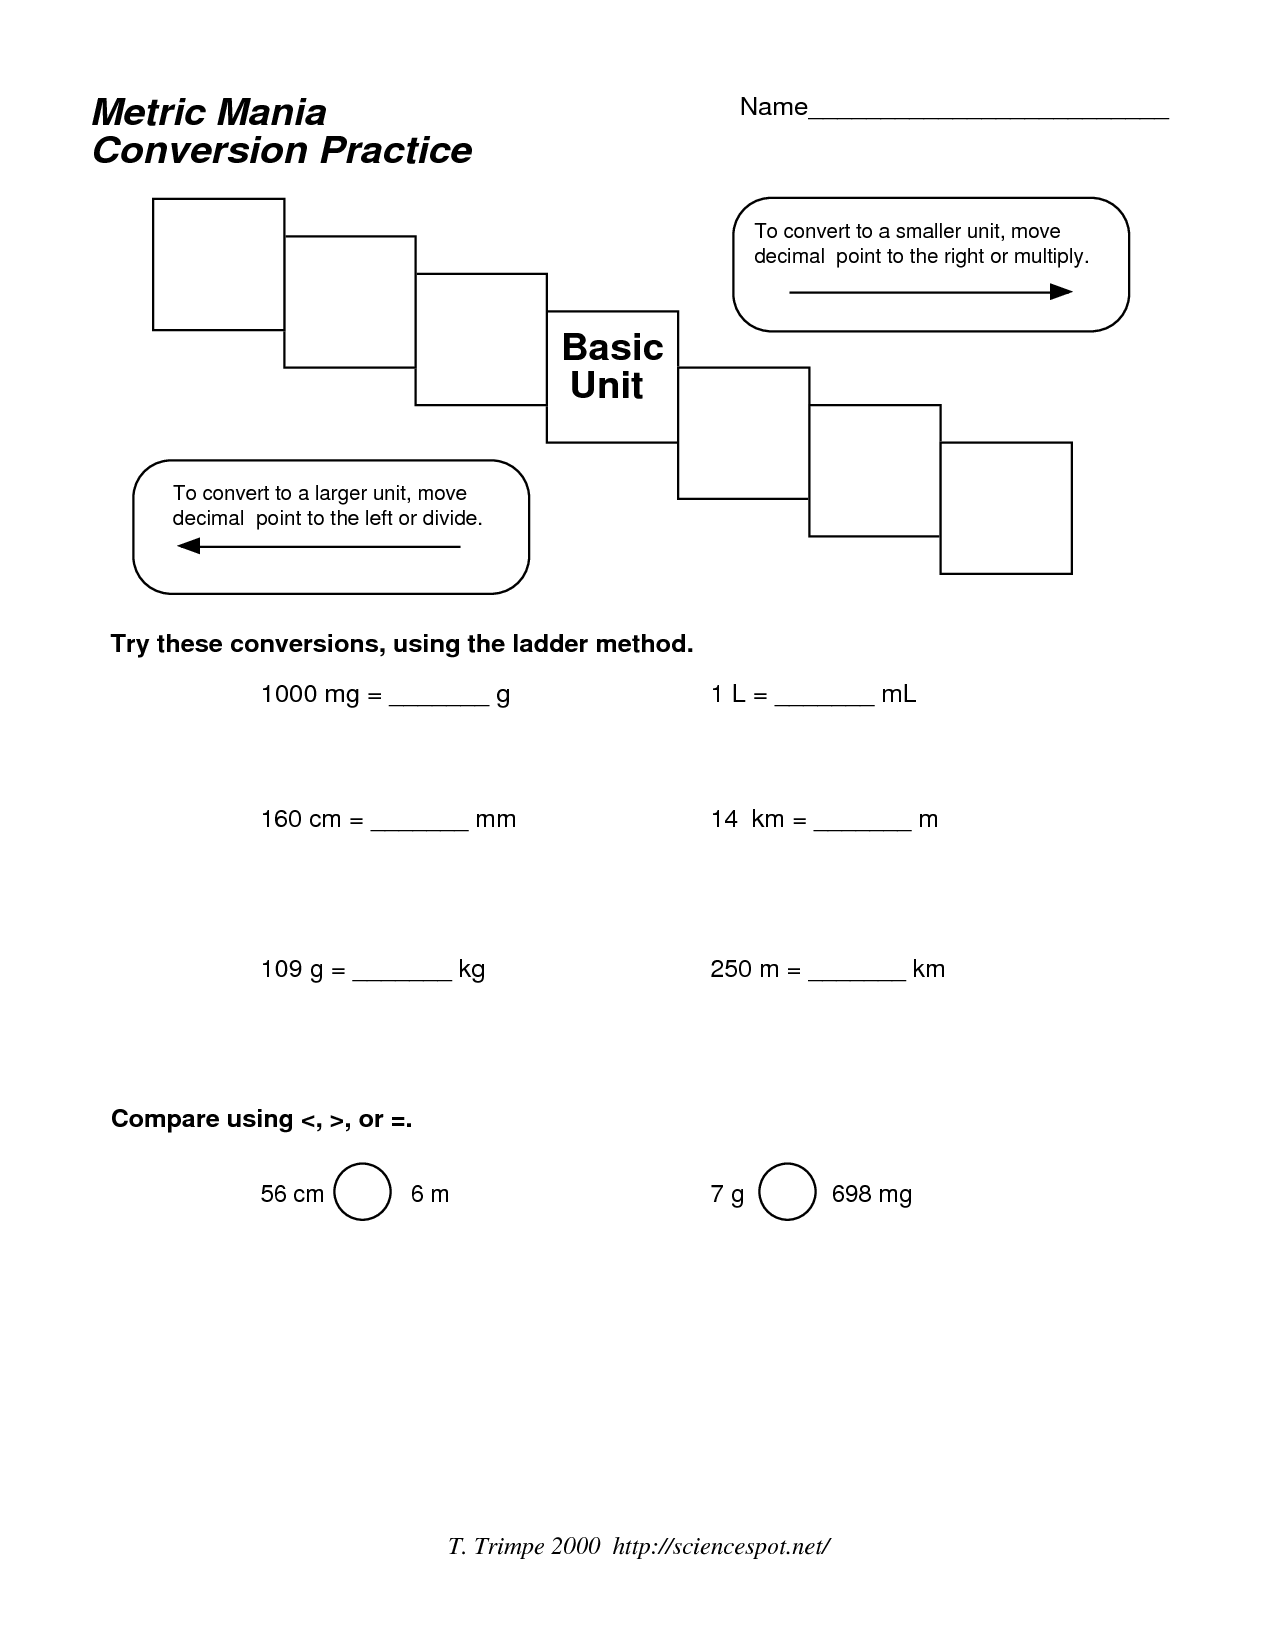 14-best-images-of-metric-system-conversion-worksheet-metric-unit-conversion-worksheet-metric